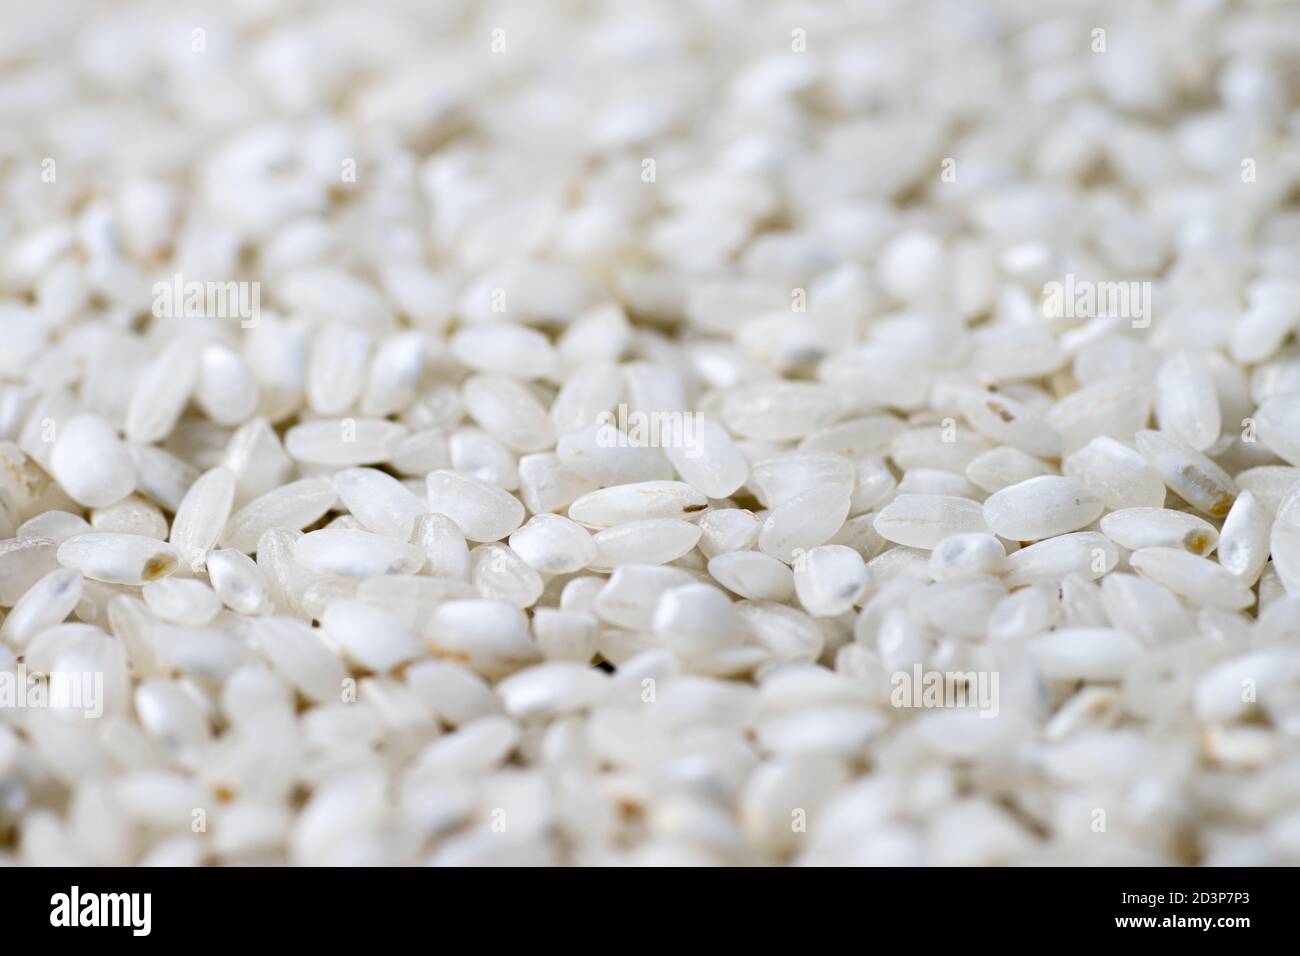 White rice seed texture as background. Perspective Stock Photo